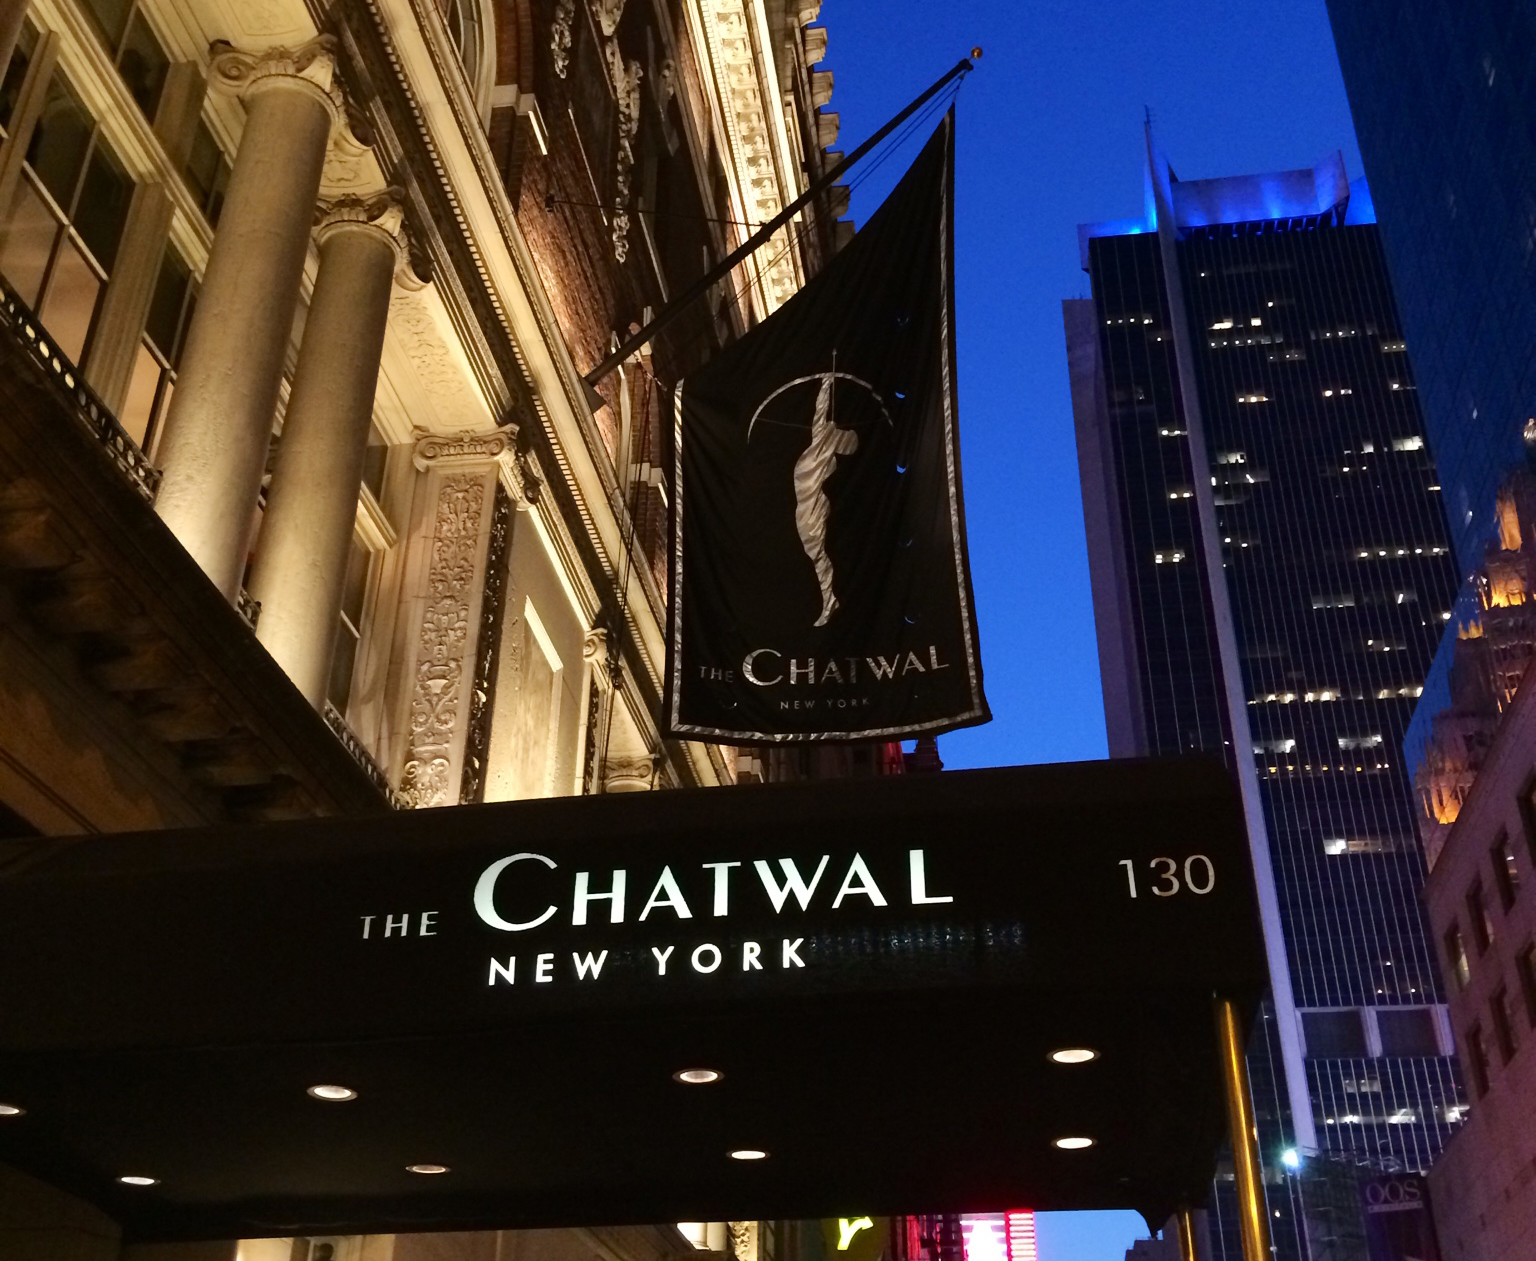 The Chatwal Hotel